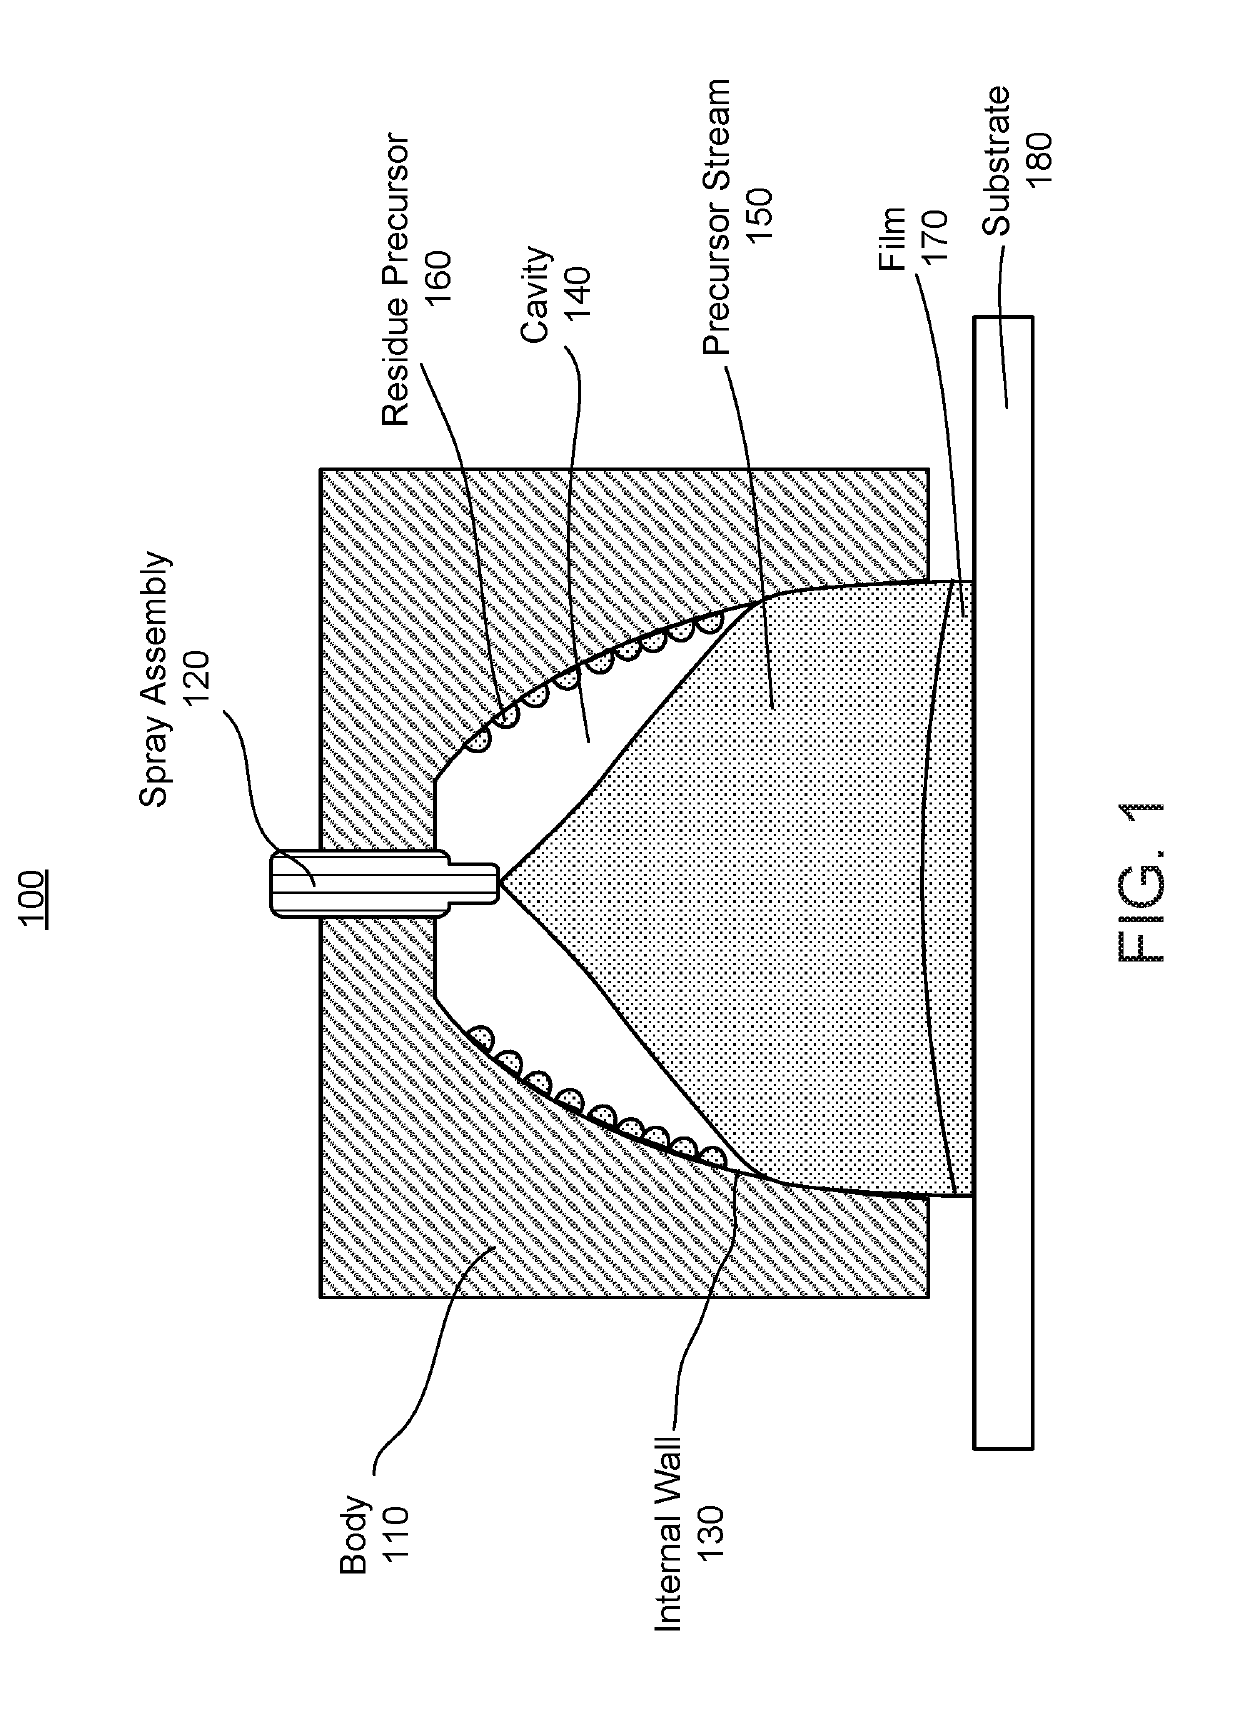 Film Deposition Apparatus With Gas Entraining Openings